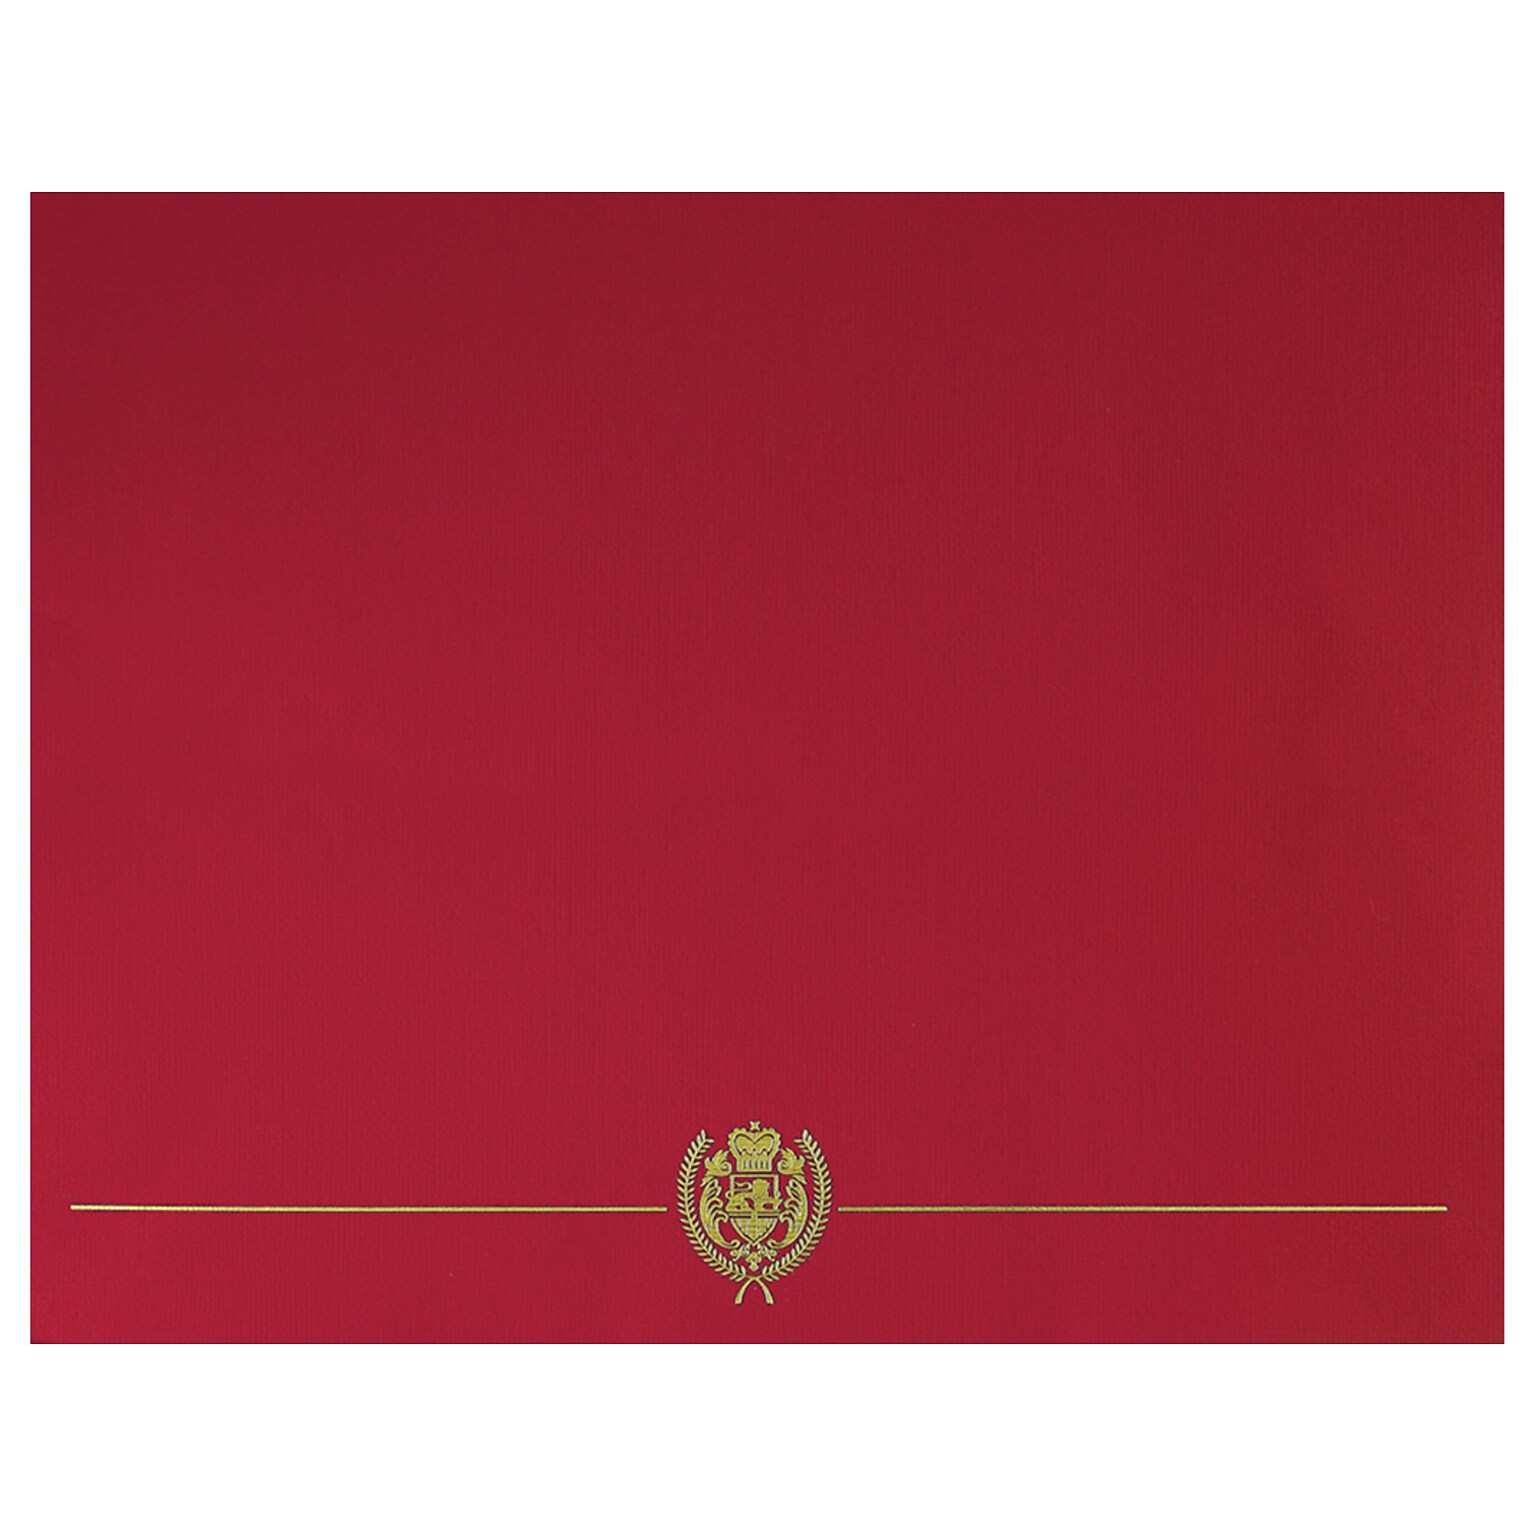 Great Papers Classic Crest Certificate Holders, 12 x 9.38, Red, 50/Pack (903031PK10)